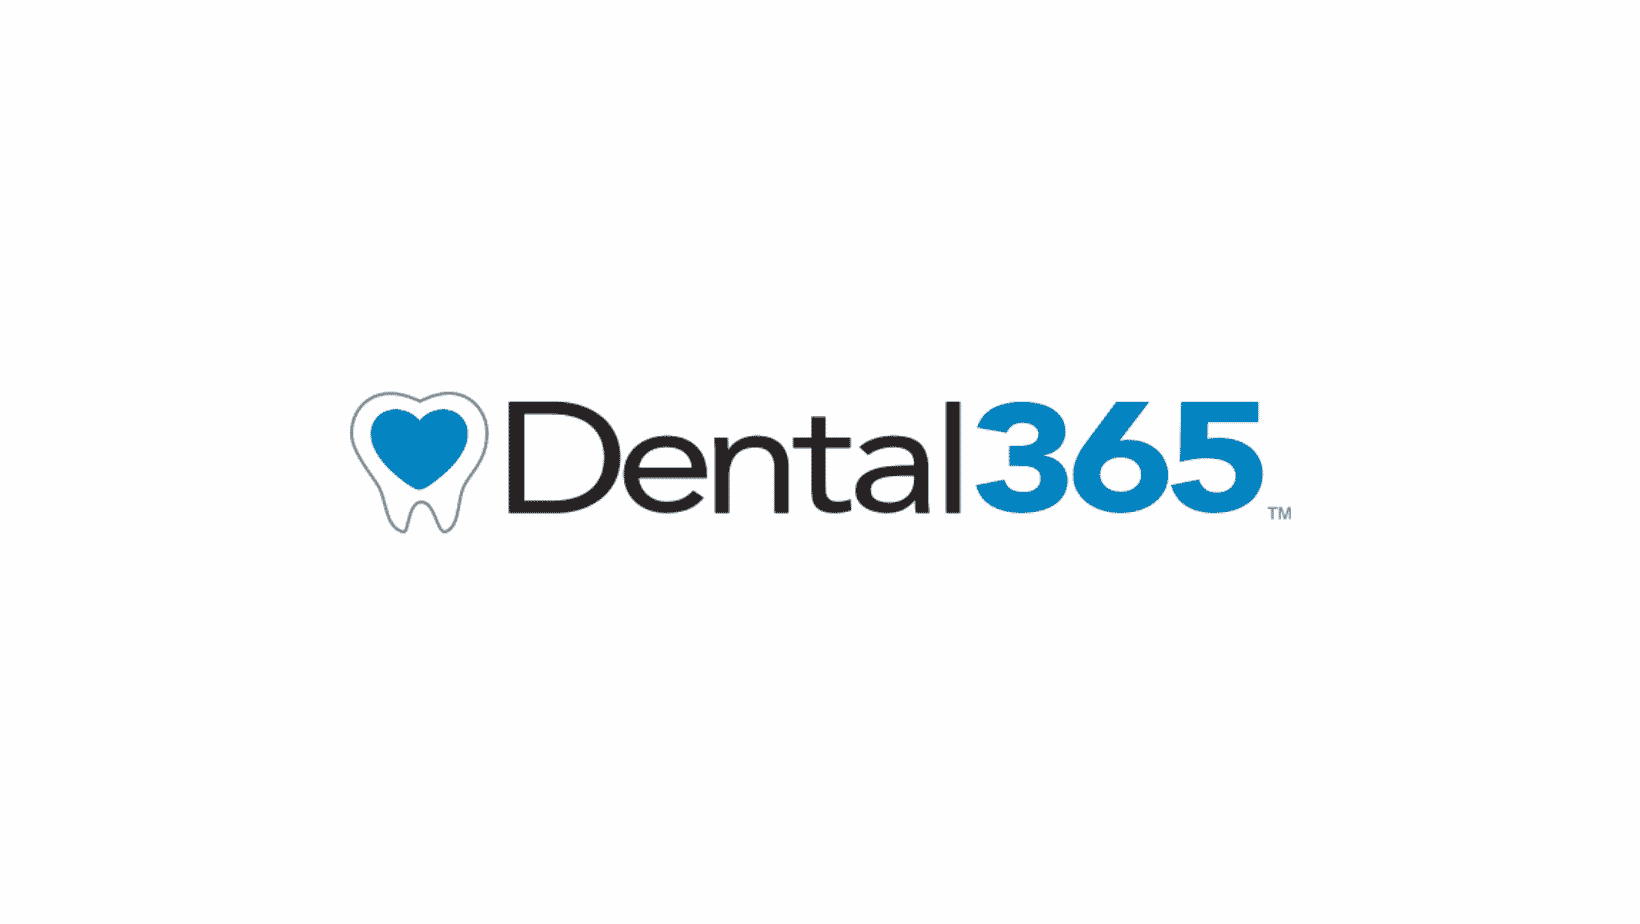 Dental365 Continues to Expand Its Footprint in New Jersey Making a Total of 21 Dental Practices in the Garden State.